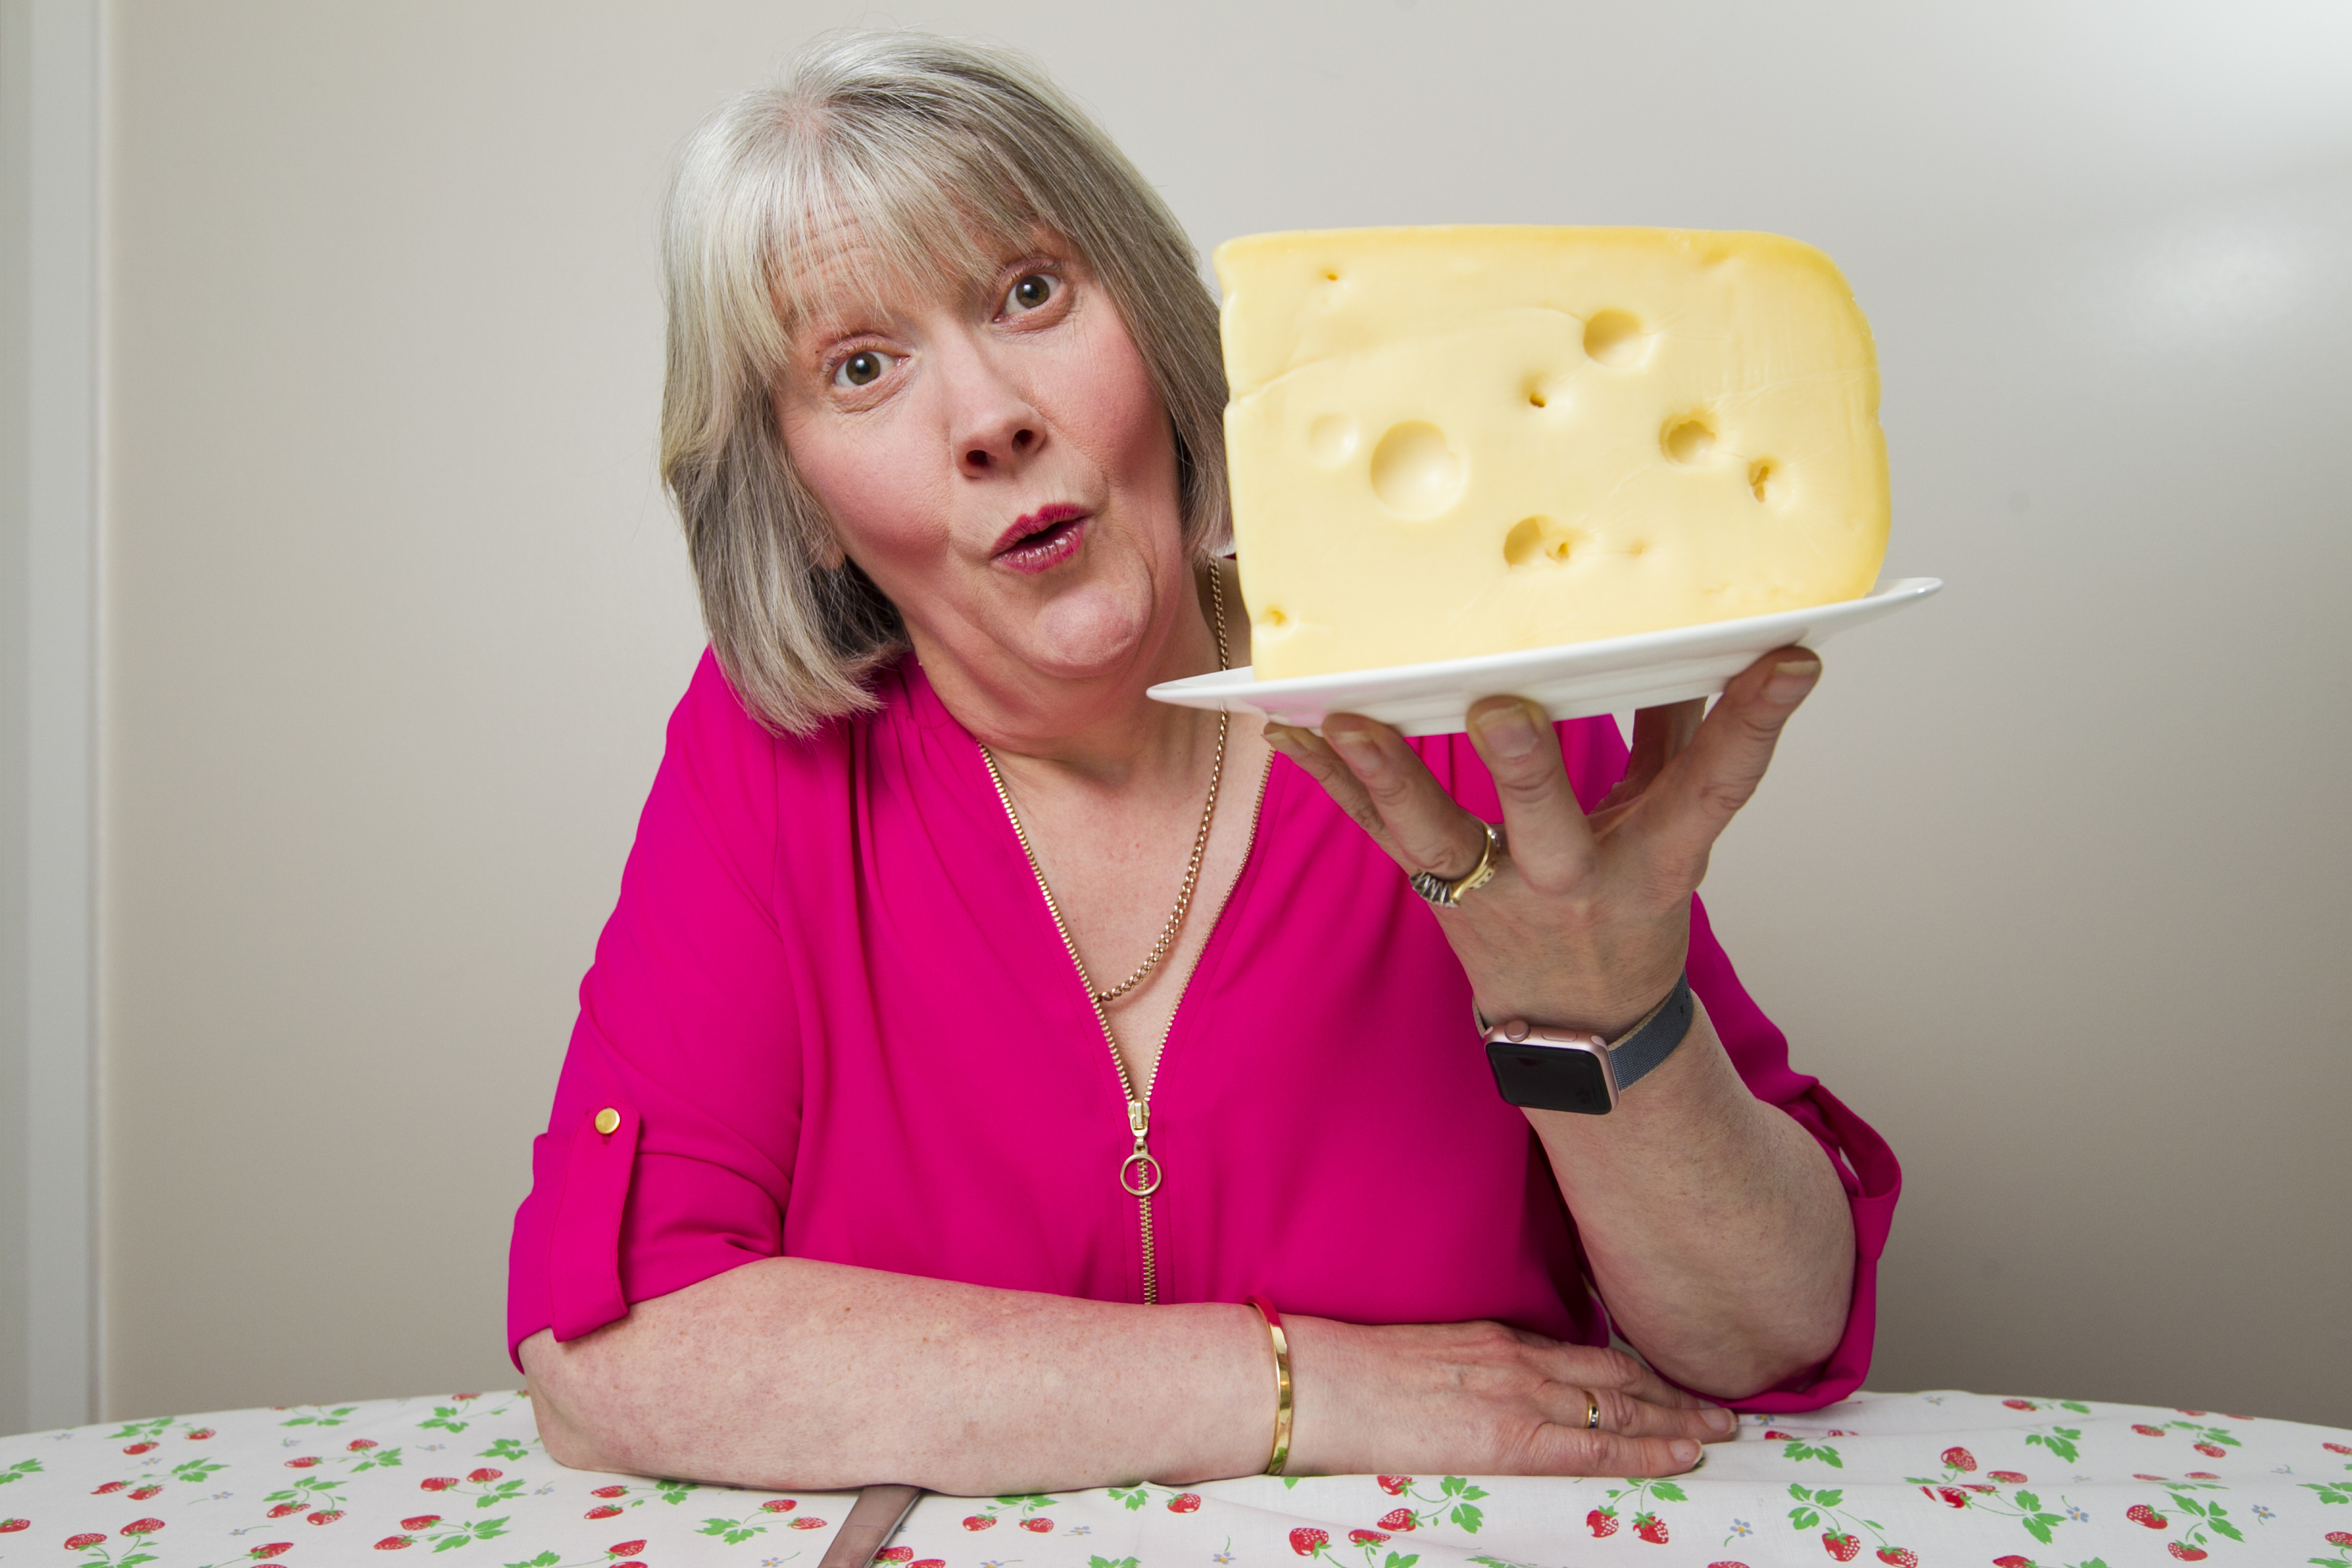 Bonnie looks tempted by some delicious cheese last week but after changing her diet she shuns the stuff (Andrew Cawley / DC Thomson)